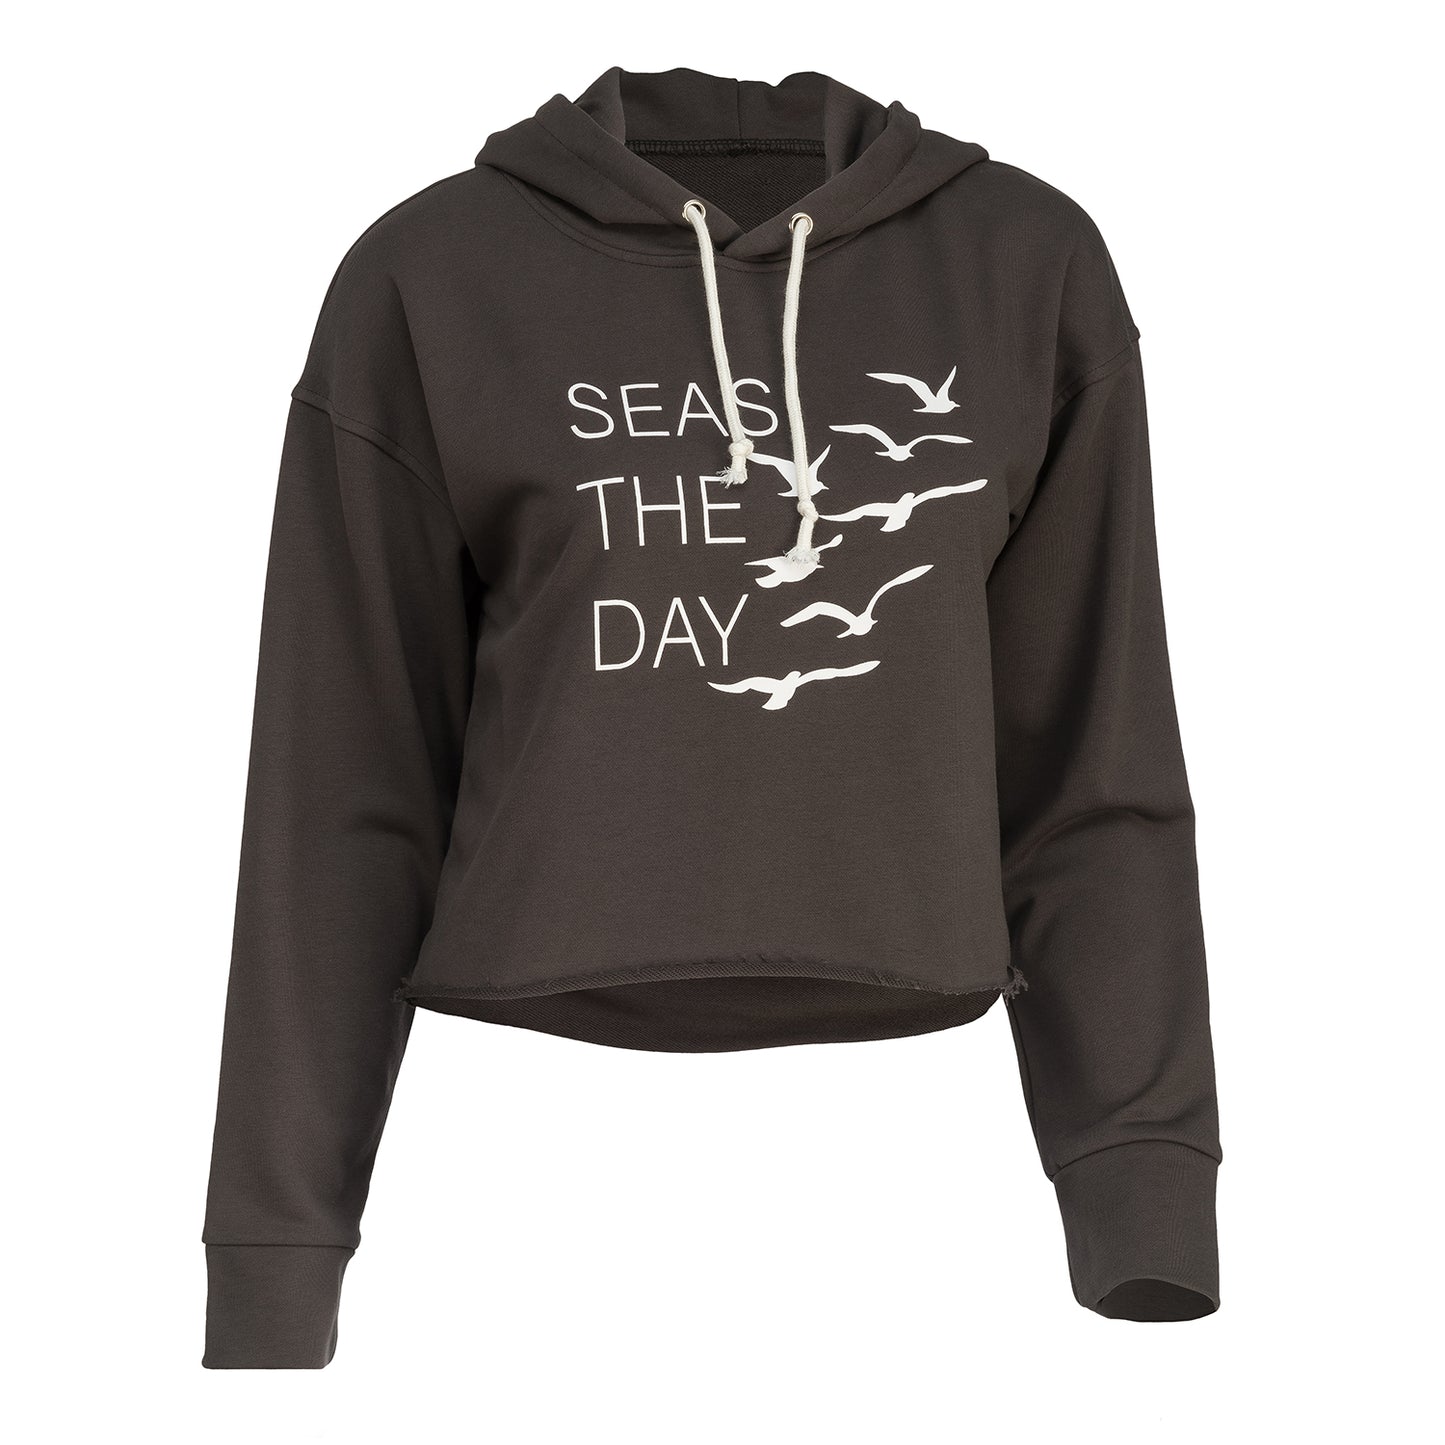 Seas The Day Cropped Hoodie